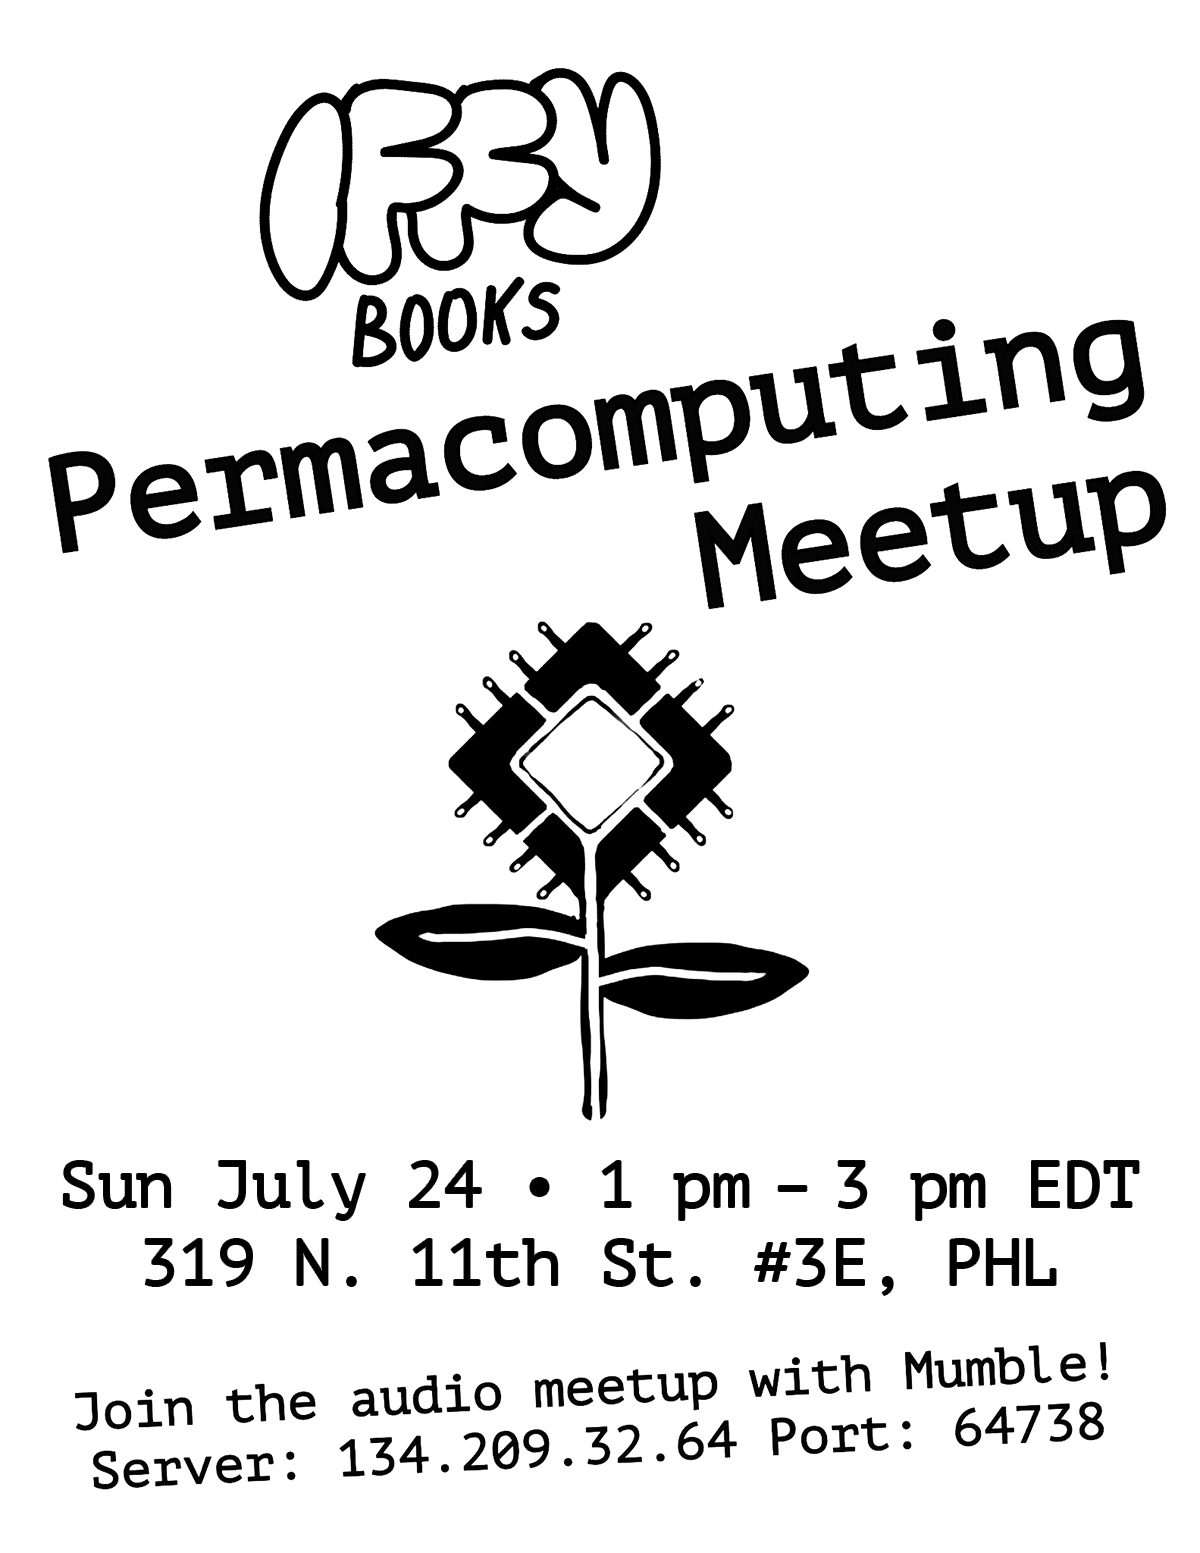 A flyer with a black & white drawing of a flower at the center, with a microchip instead of a flower head. The text reads \"Iffy Books Permacomputing Meetup / Sun July 24 • 1 pm – 3 pm EDT / 319 N. 11th St. #3E, PHL / Join the audio meetup with Mumble! Server: 134.209.32.64 Port: 64738